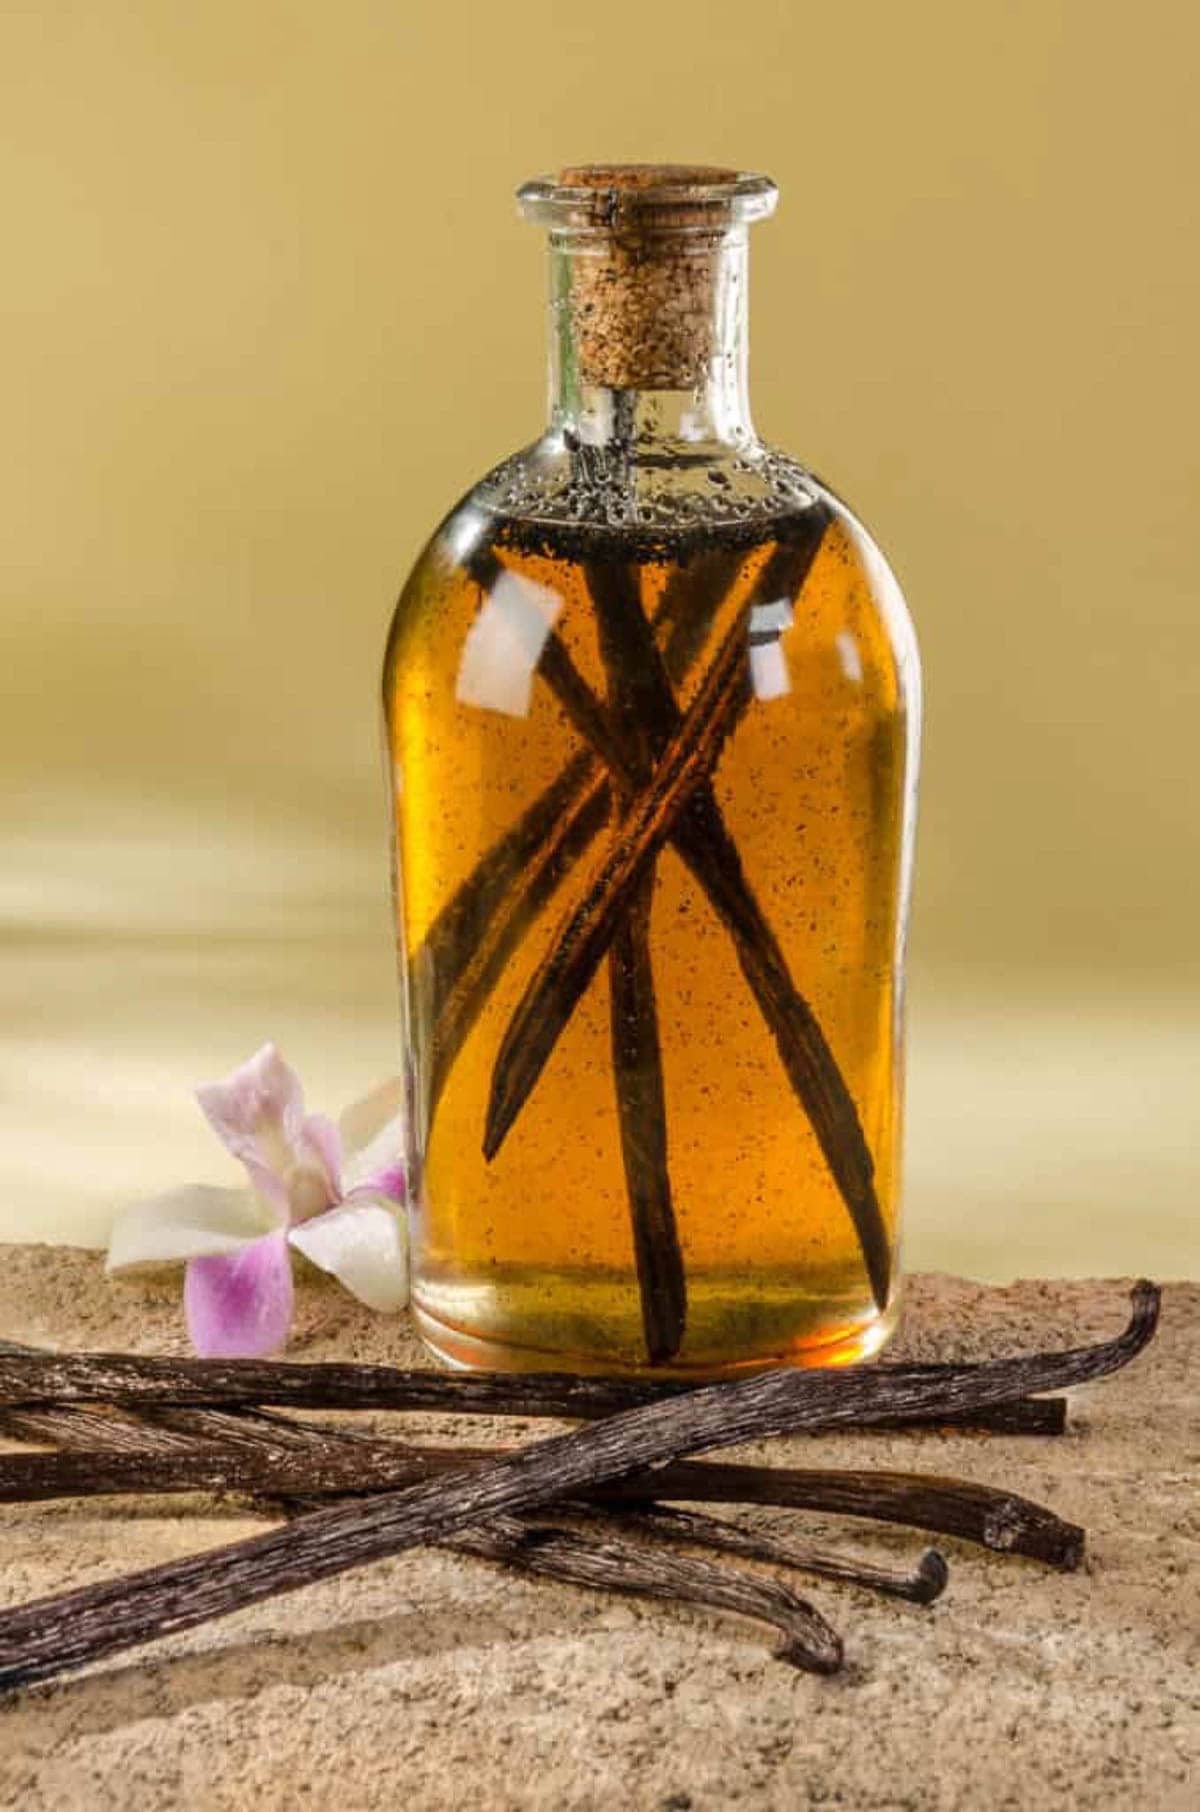 A side shot of a glass bottle of homemade vanilla extract with beans in it.